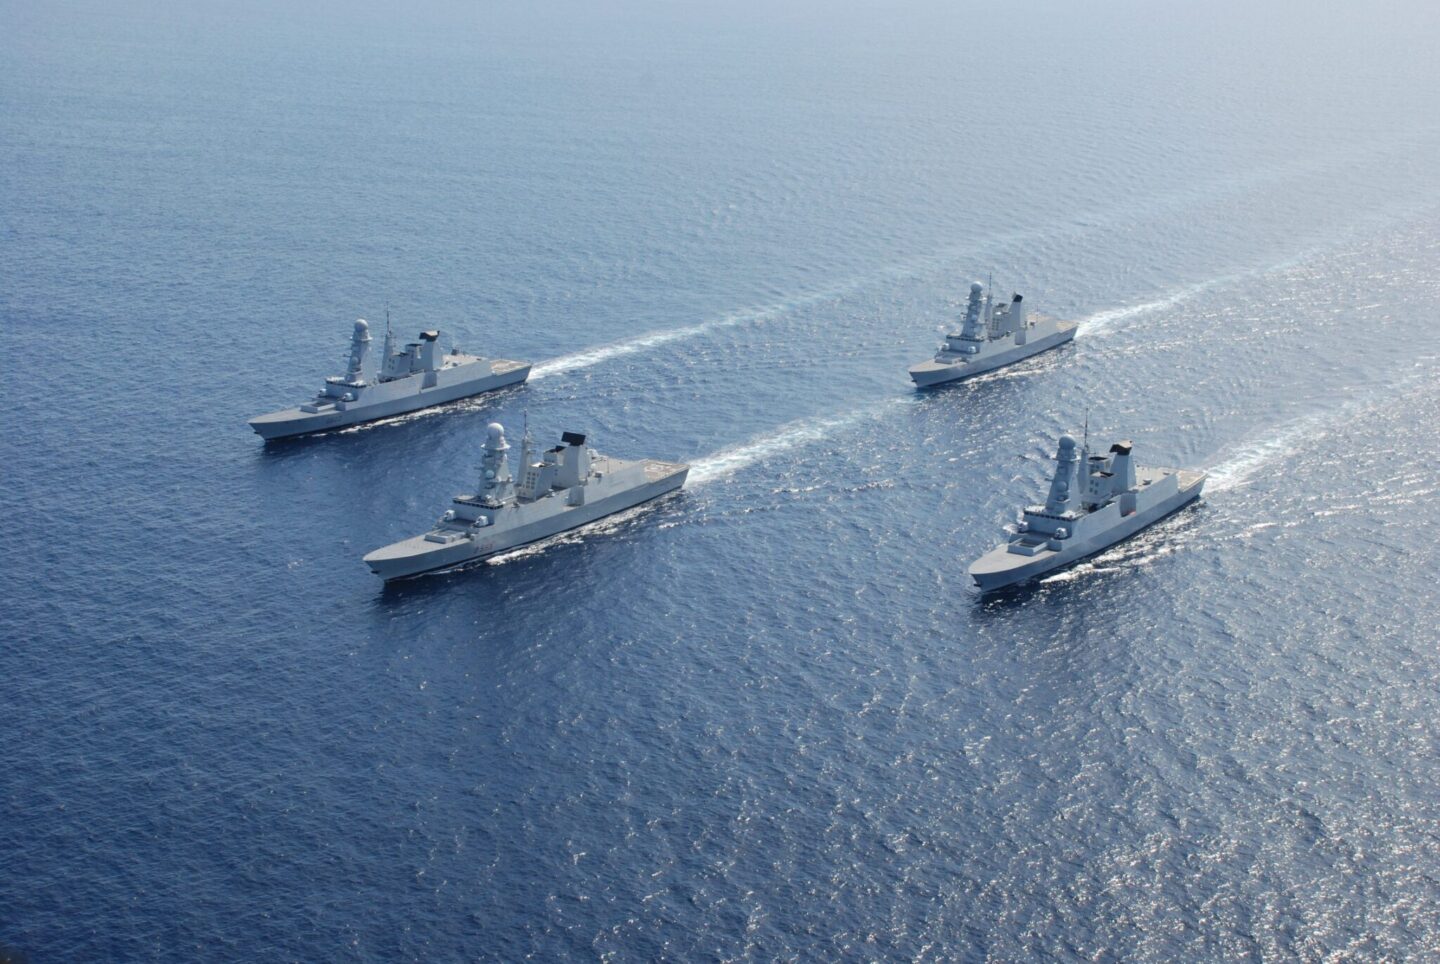 France and Italy Award €1.5 Billion Contract for Upgrade of Horizon-class Frigates